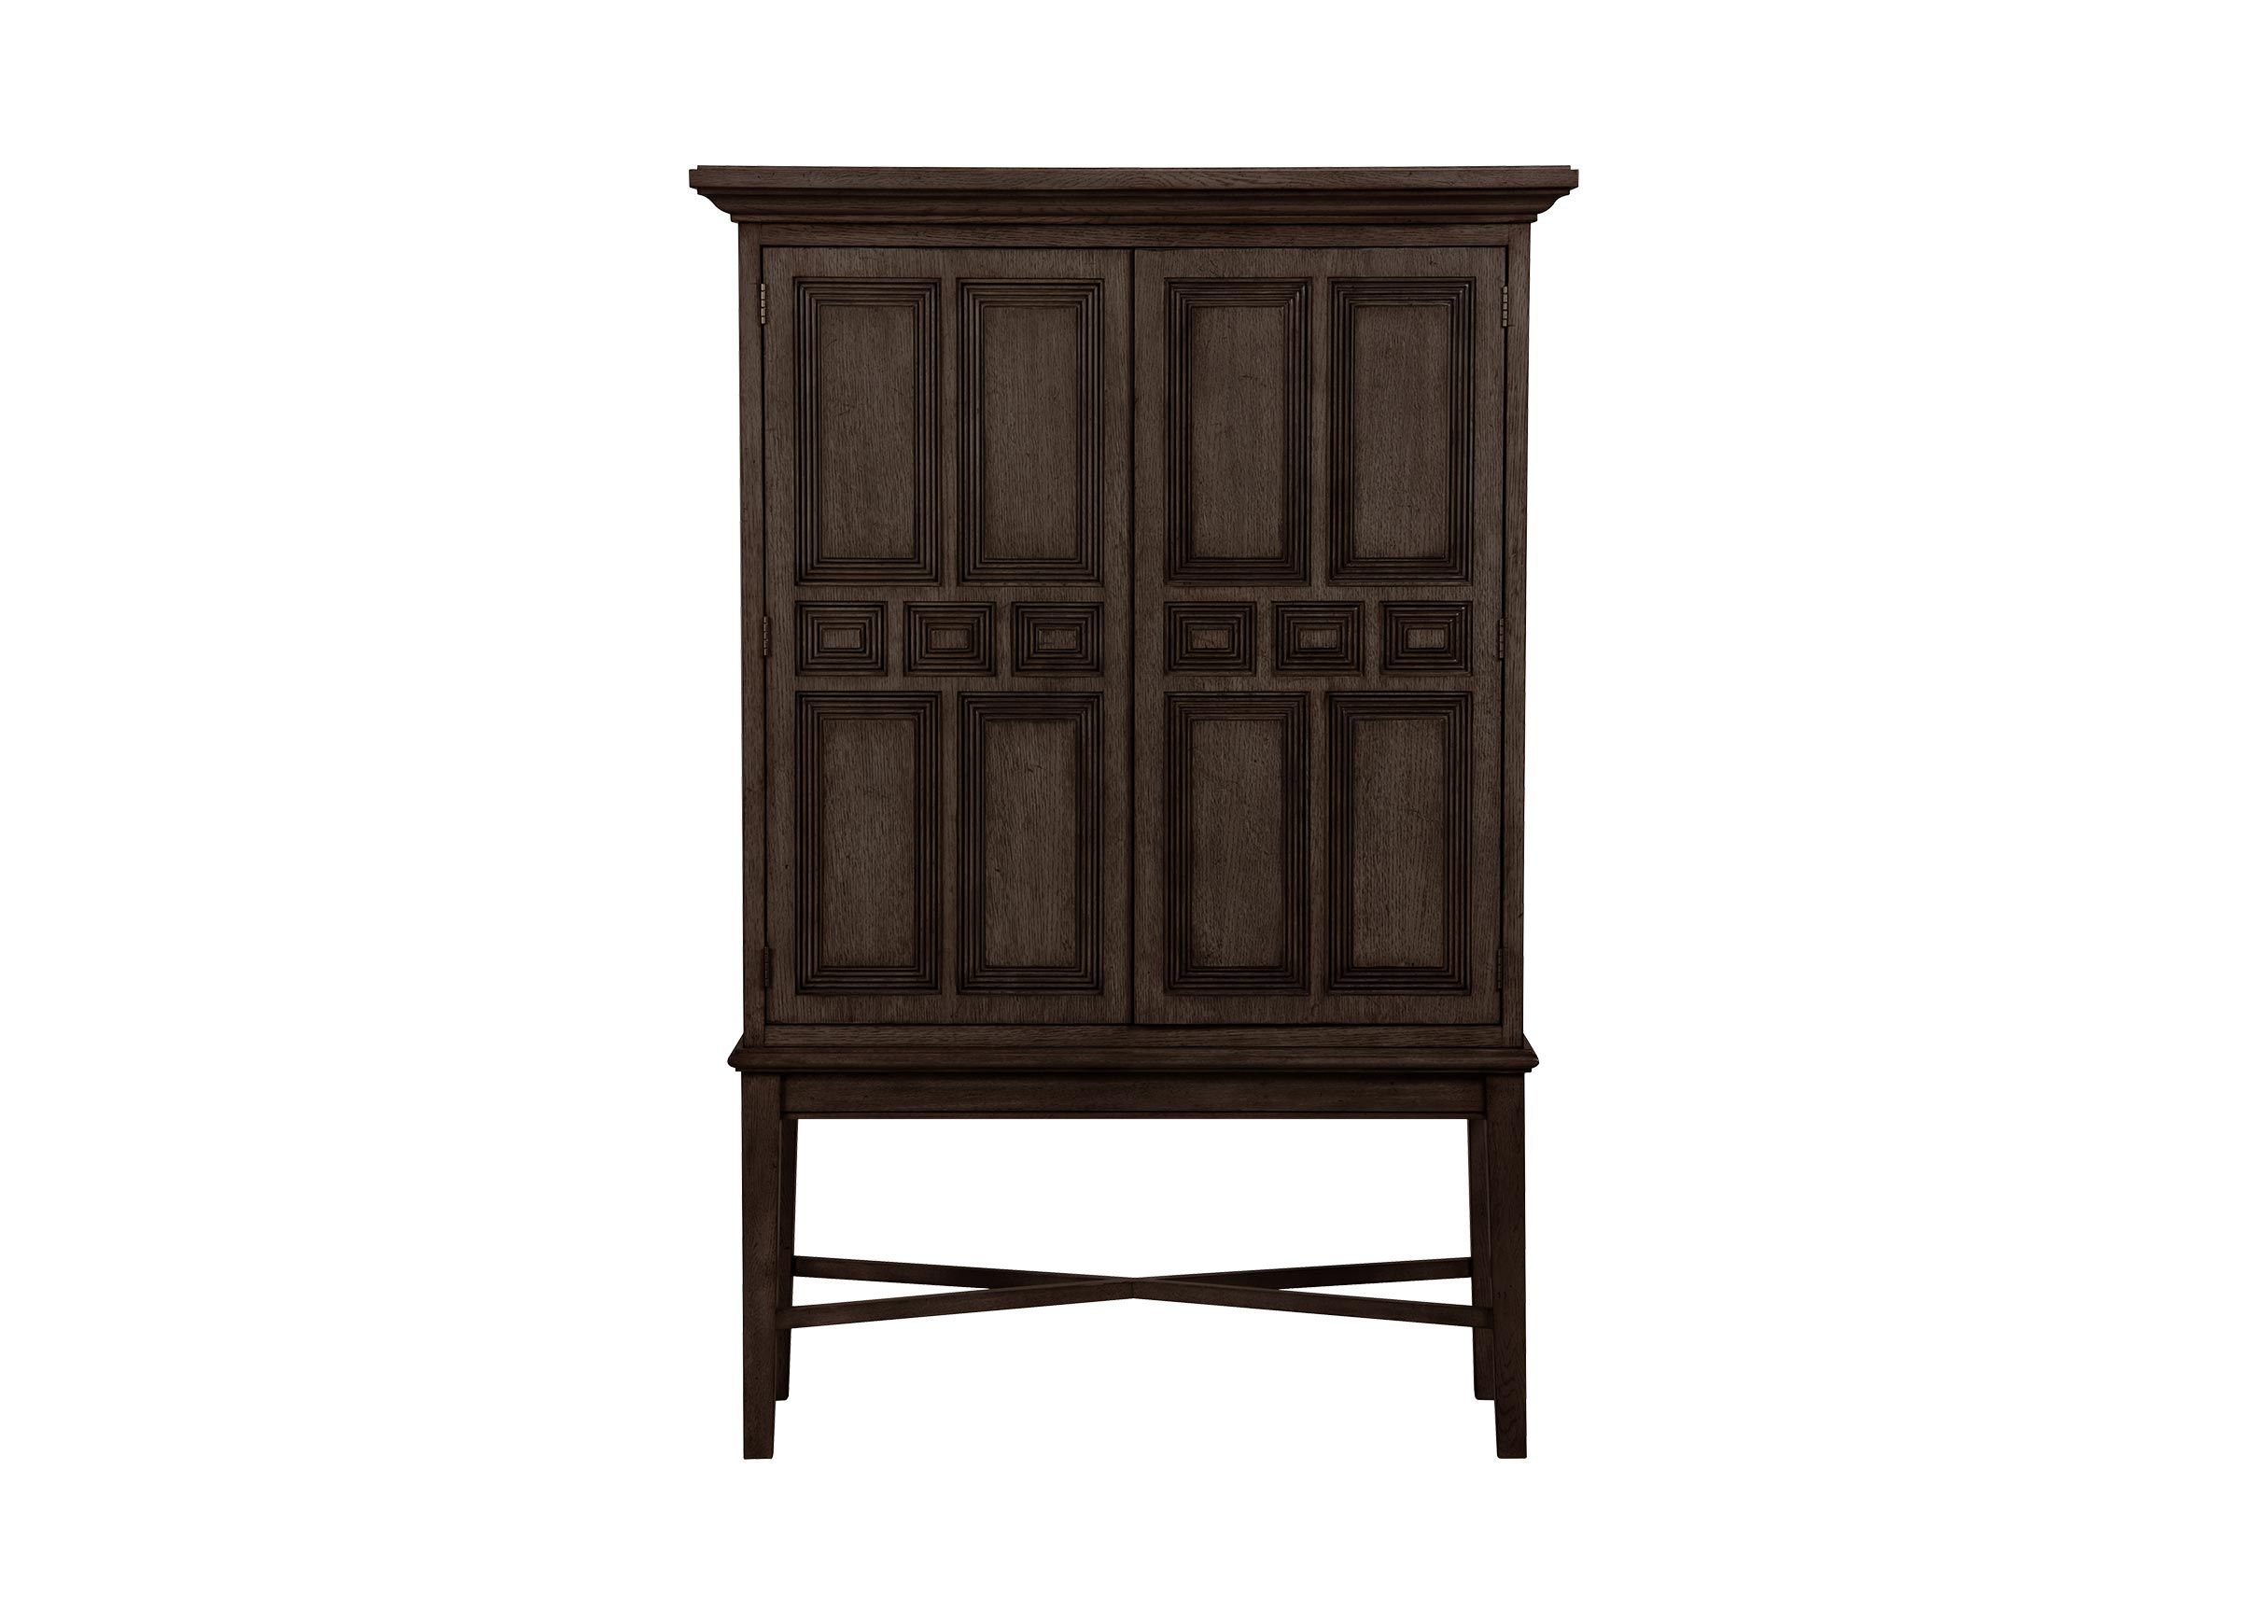 Buffets | Sideboards & Home Servers | Ethan Allen In Mirrored Double Door Buffets (View 23 of 30)